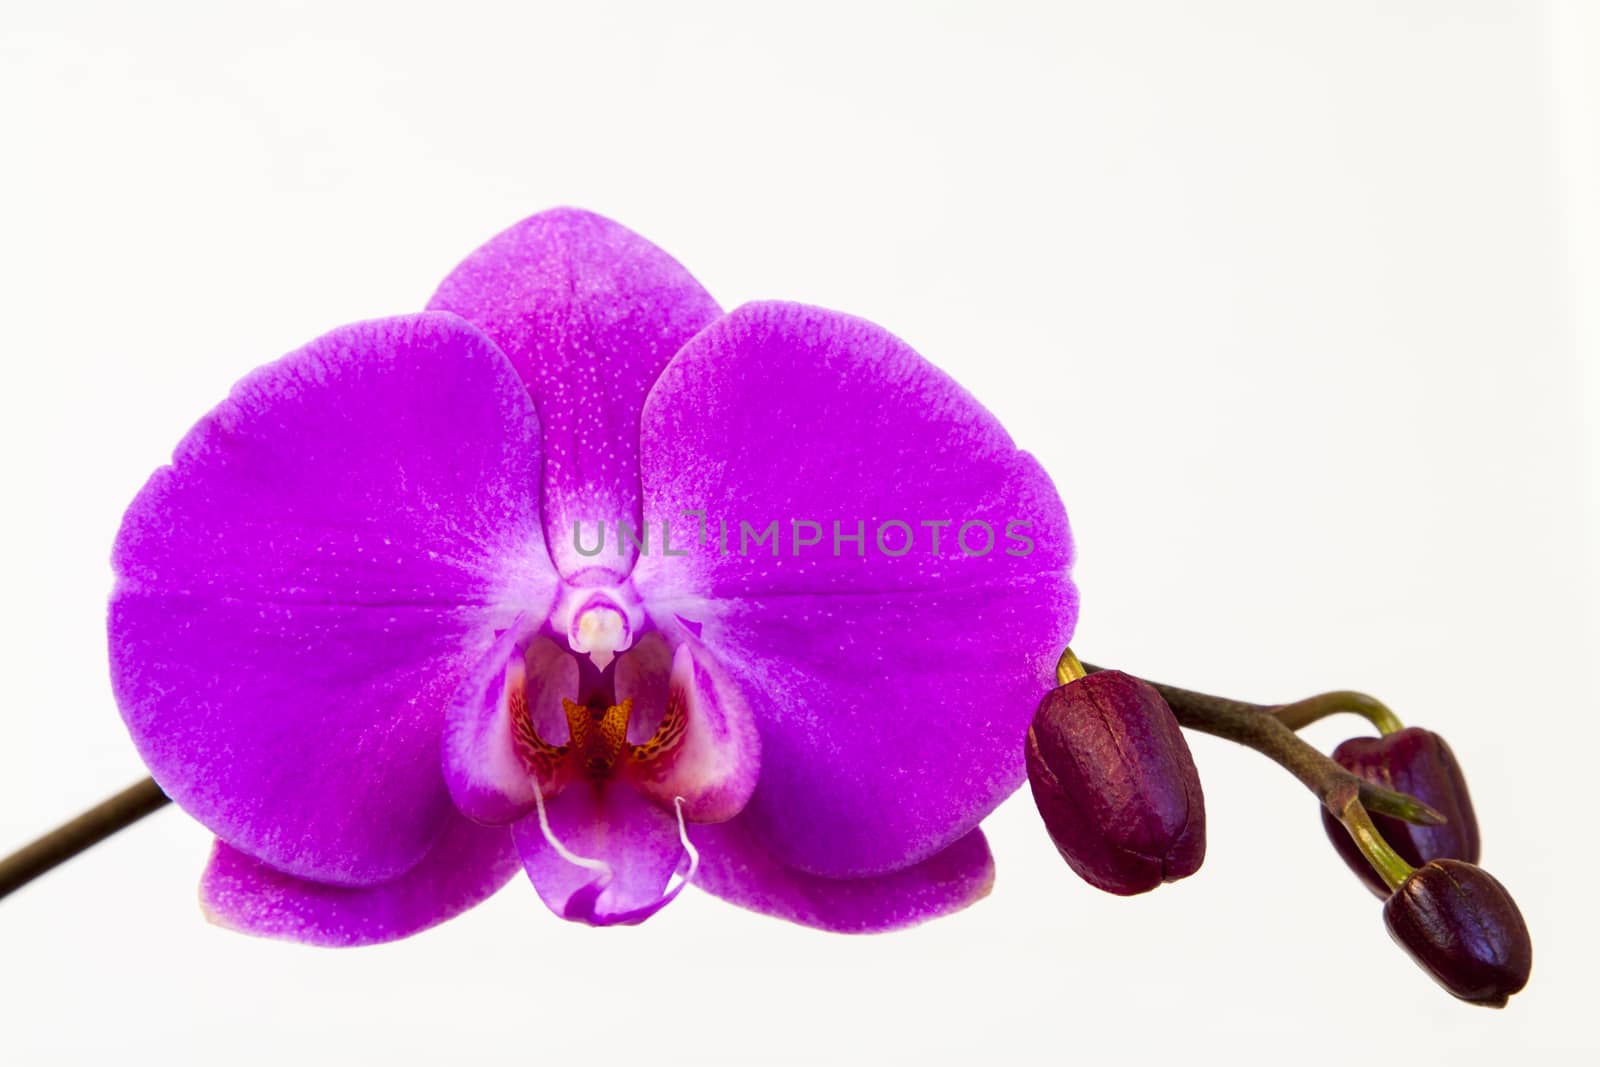 Close up view of orchid on white background